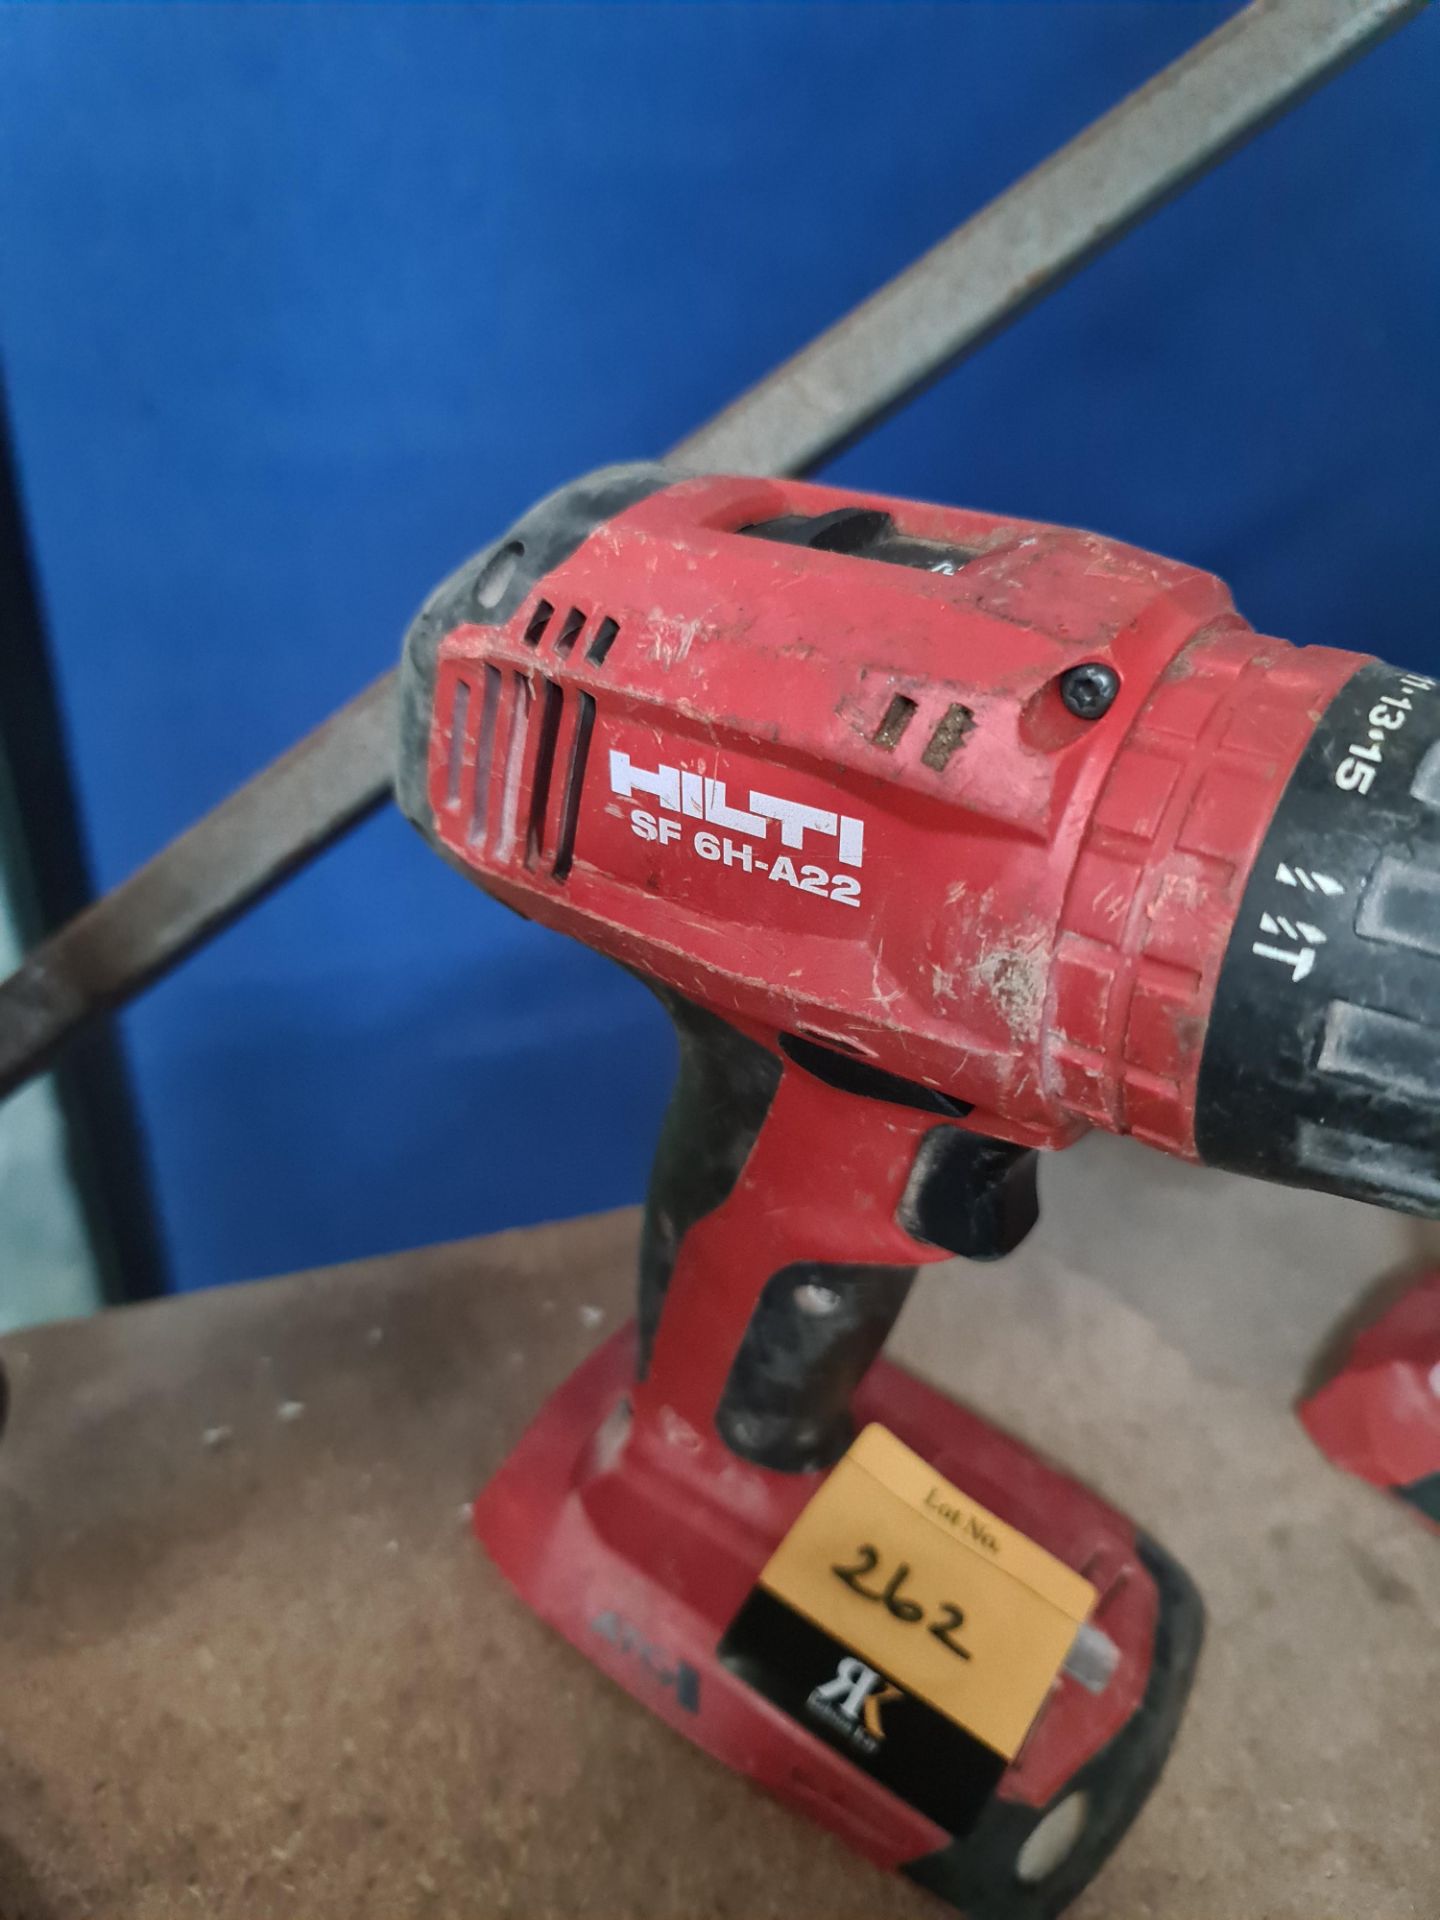 Hilti SF 6H-A22 cordless hammer drill driver - no battery - Image 5 of 5